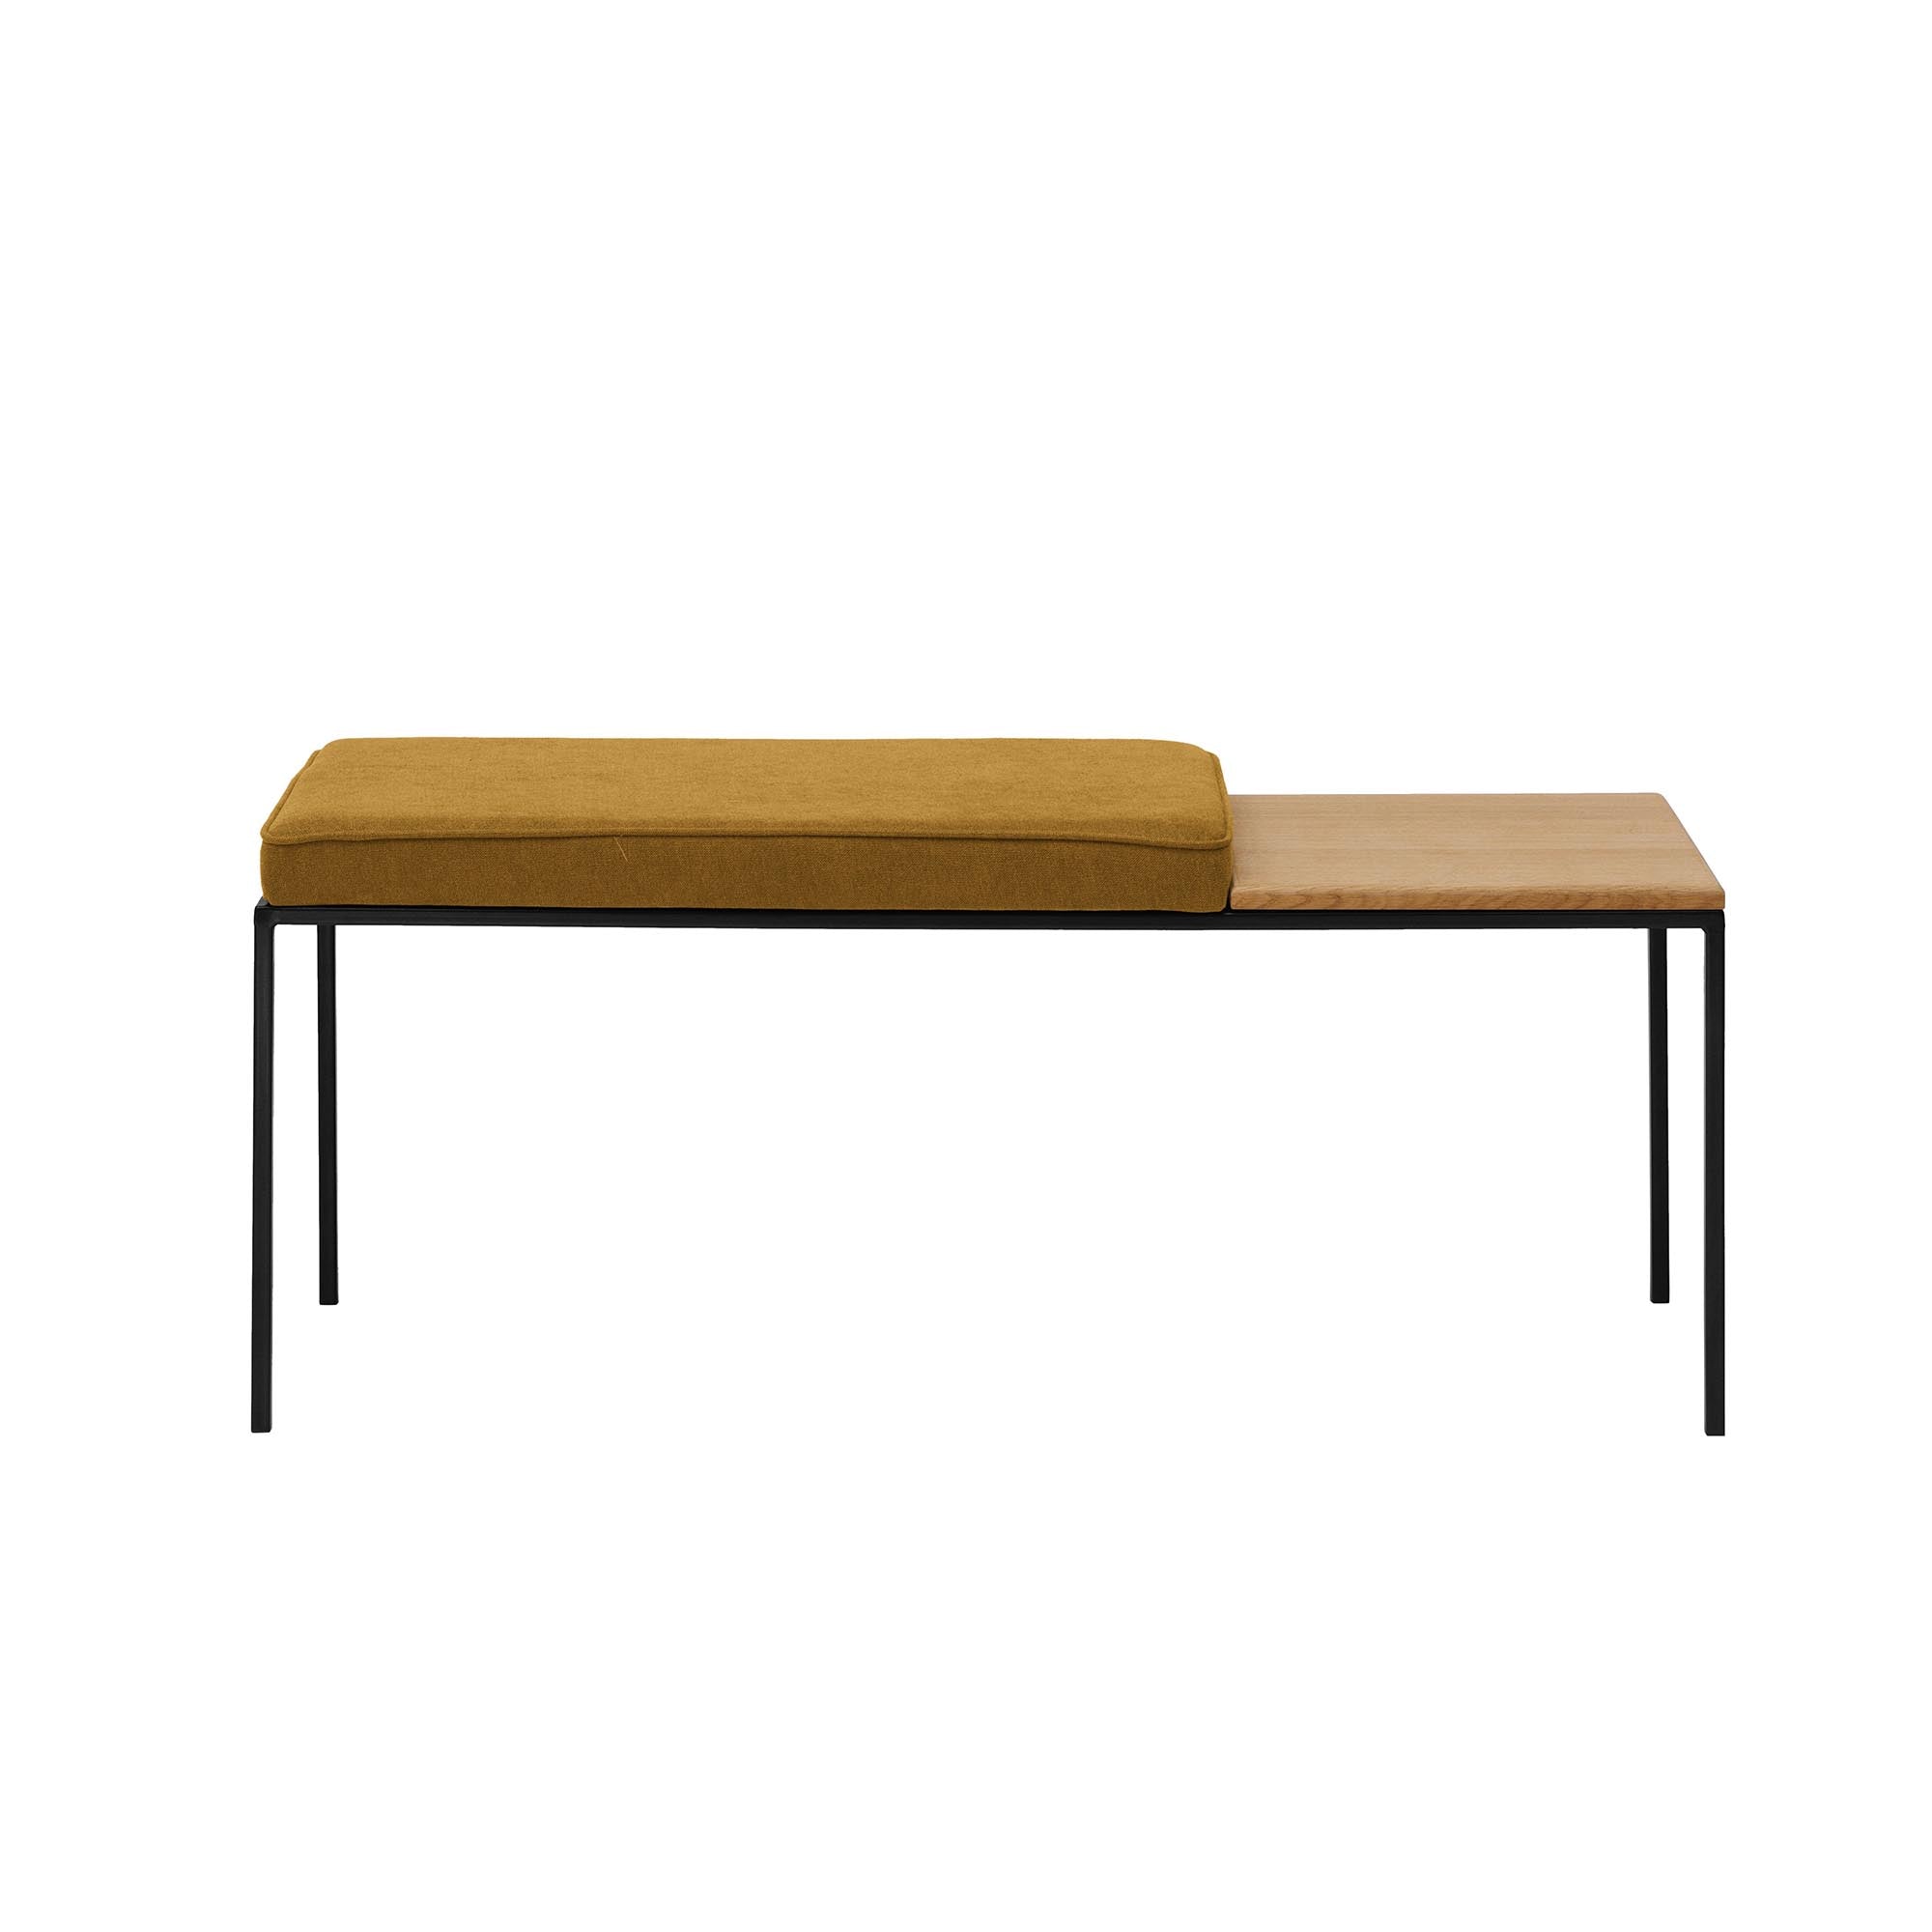 Oak Wood Seat, Natural Colour yellow fabric, black frame, front view